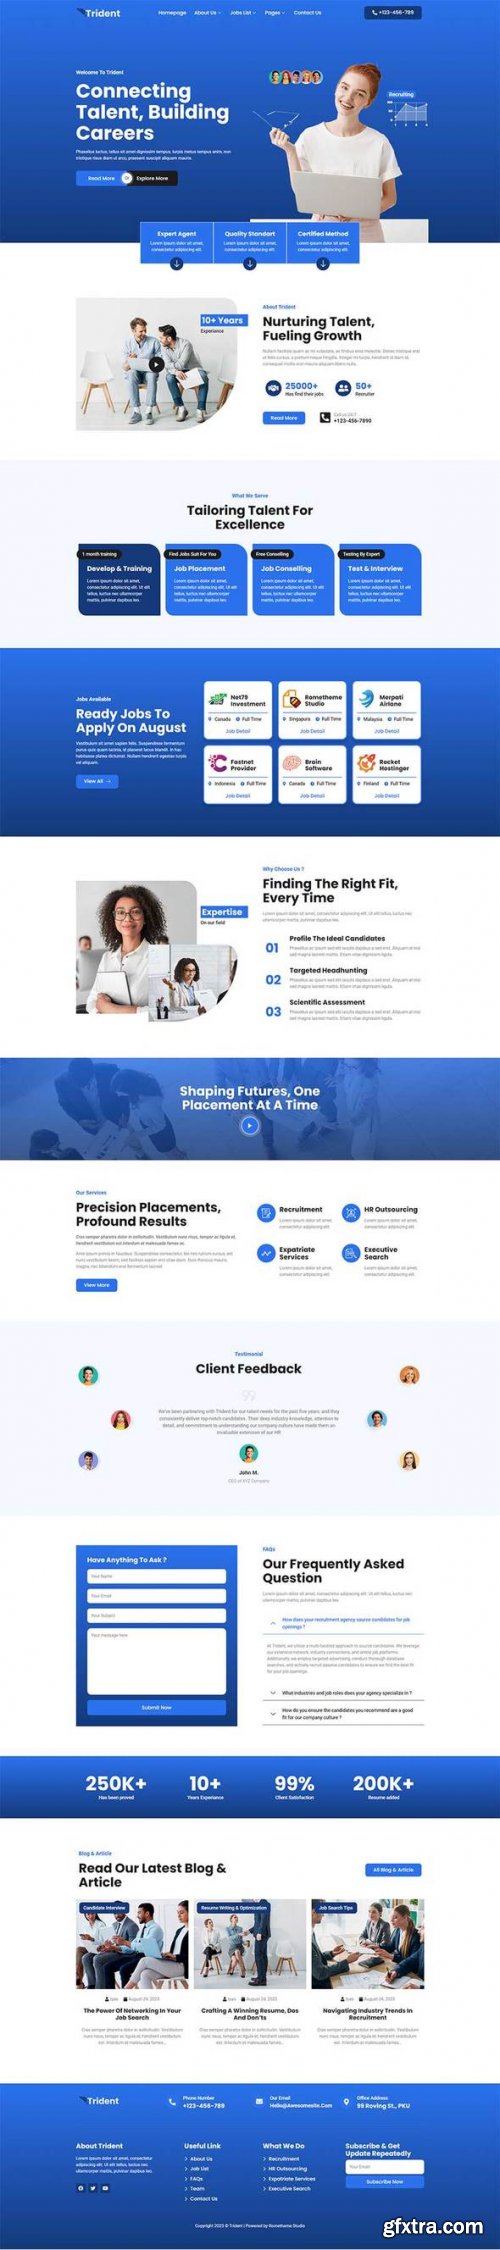 Themeforest - Trident - Human Resources &amp; Recruitment Agency Elementor Template Kit 47716969 v1.0.0 - Nulled